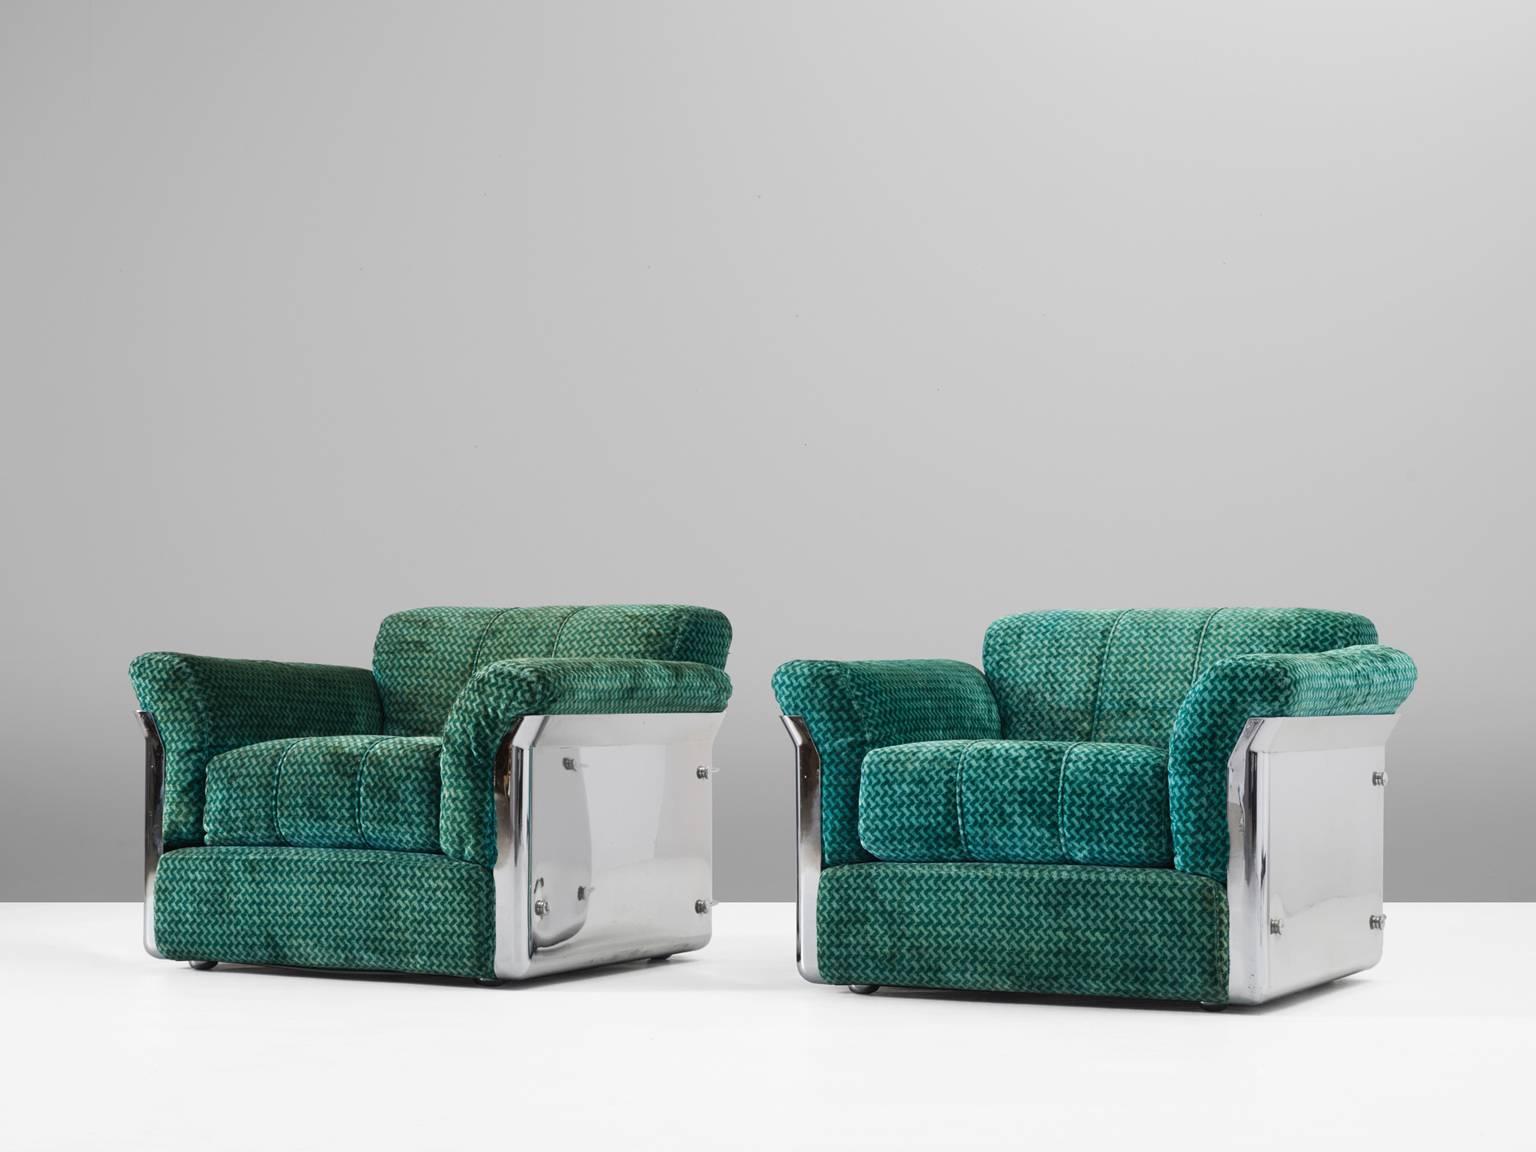 Pair of lounge chairs, in fabric and chrome, by Vittorio Introini for Saporiti, Italy 1969 

Rare set of two lounge chairs by Saporiti in chrome and colorful turquoise upholstery. Absolutely stunning mirrored lounge chairs. The frame consist of